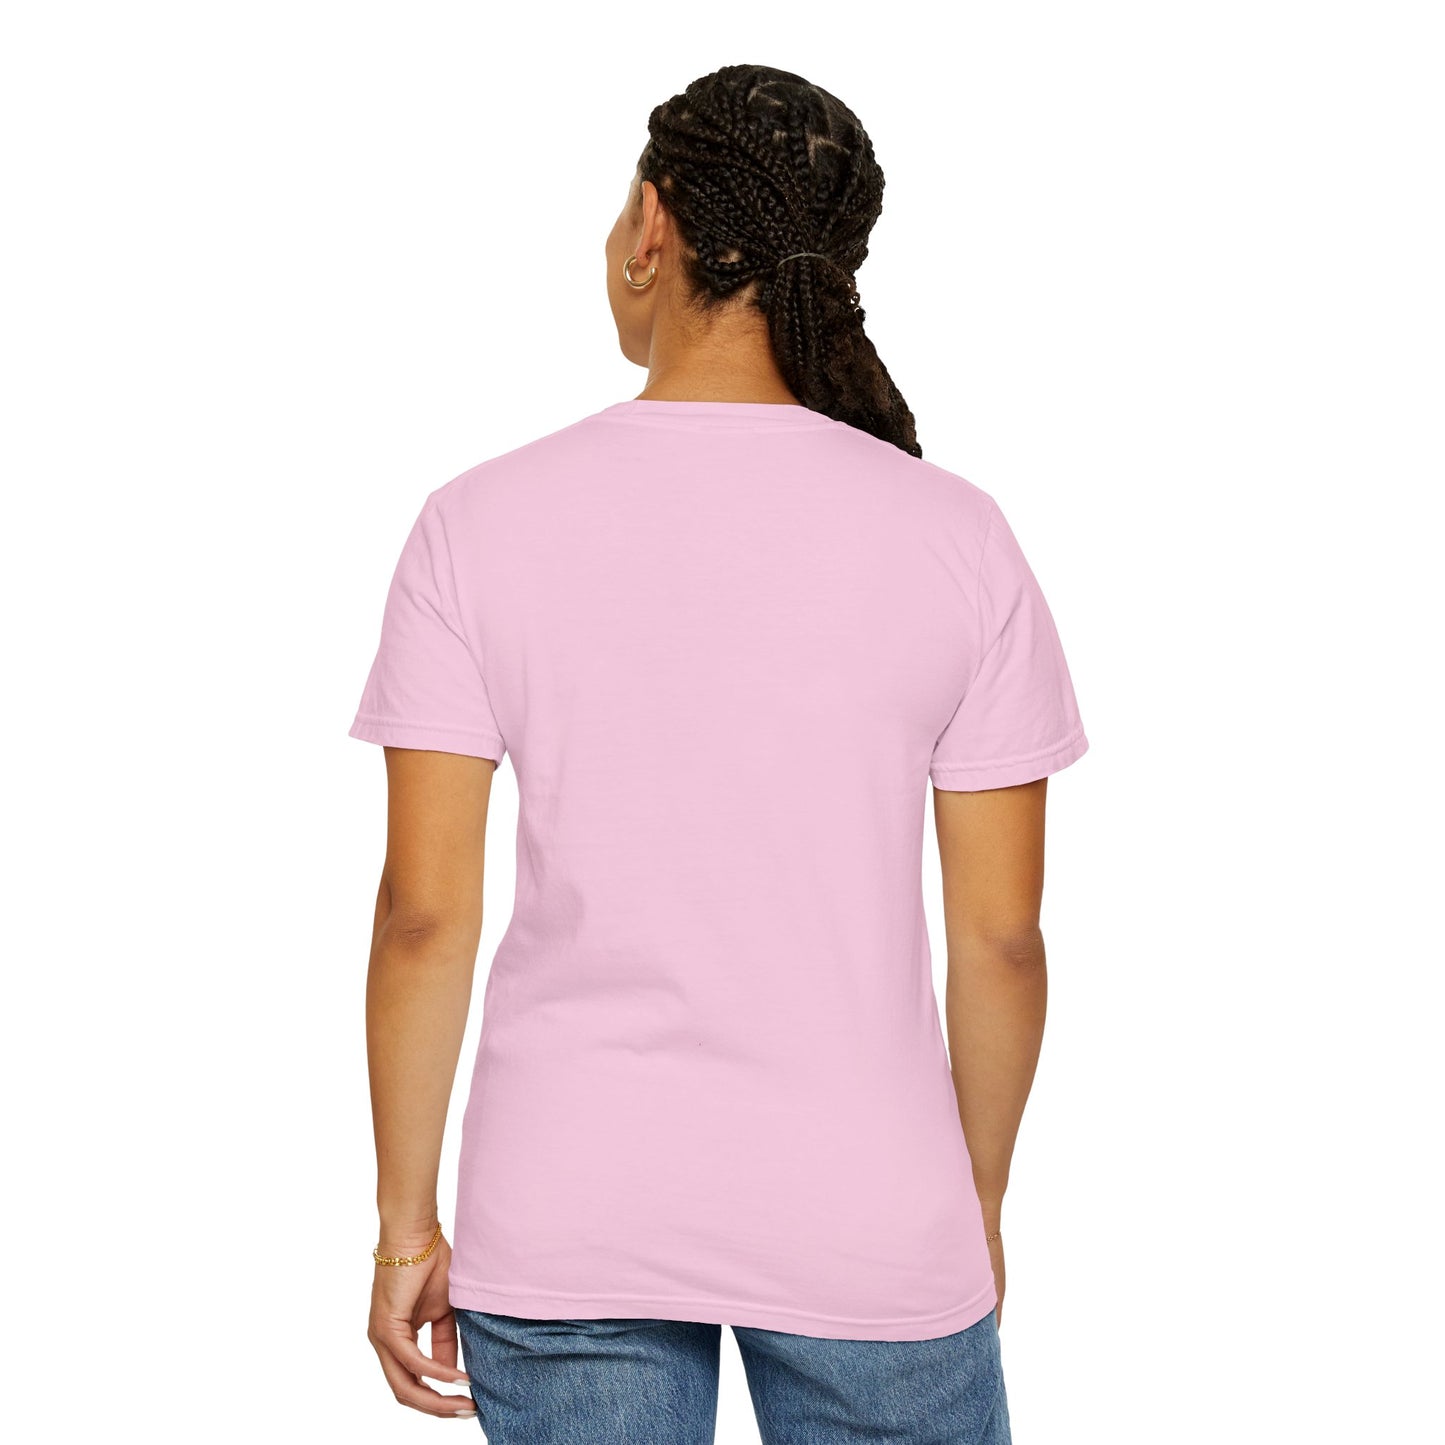 Husband and wife for life: Unisex Garment-Dyed T-shirt